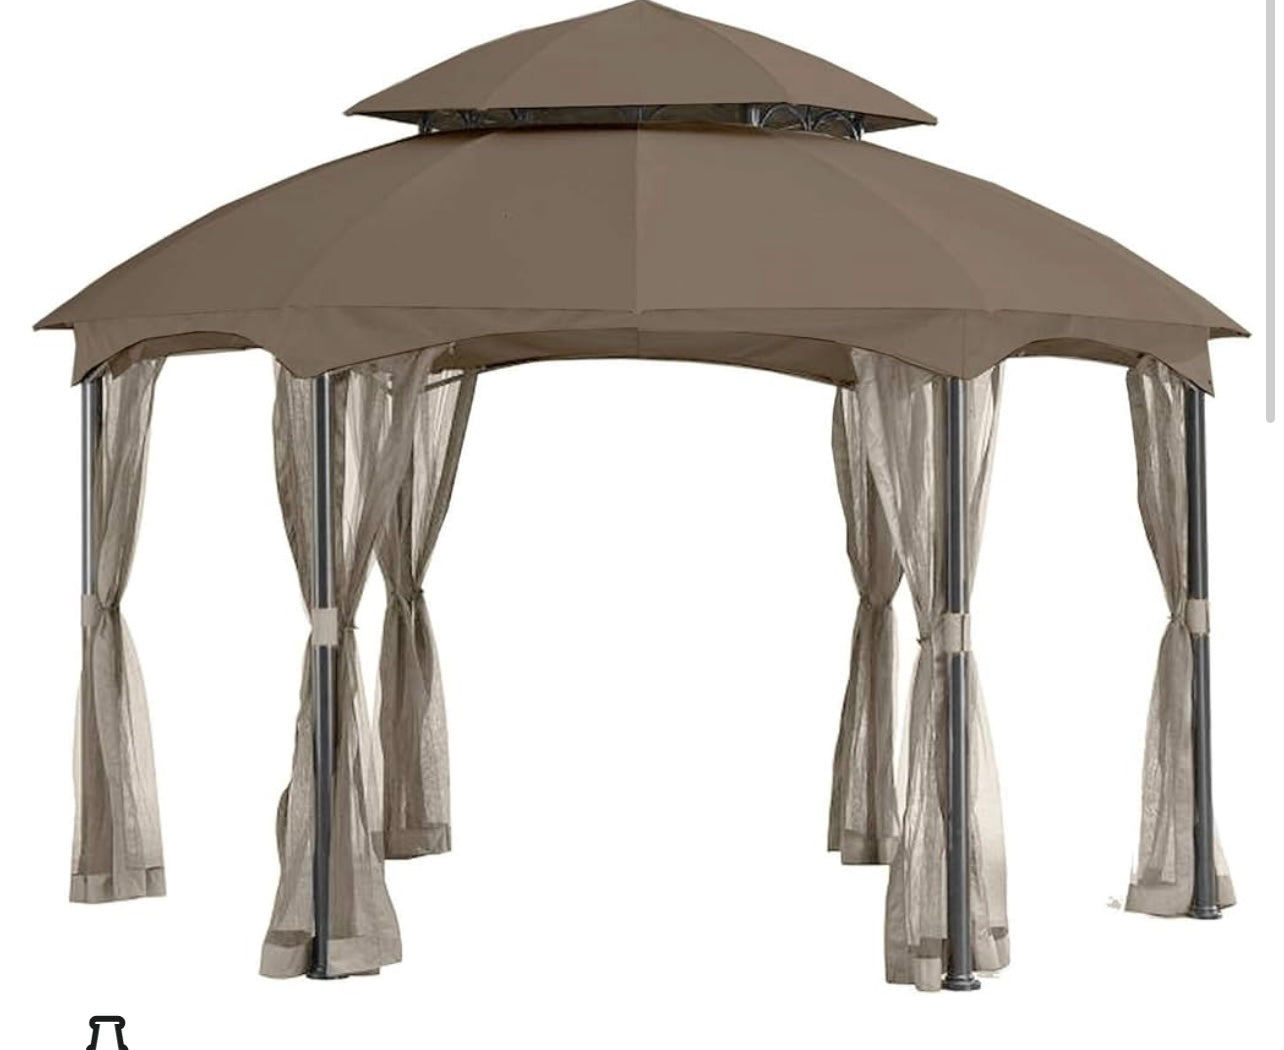 Replacement Canopy and Screen Set Hexagon Gazebo Brown Canopy Beige Screen